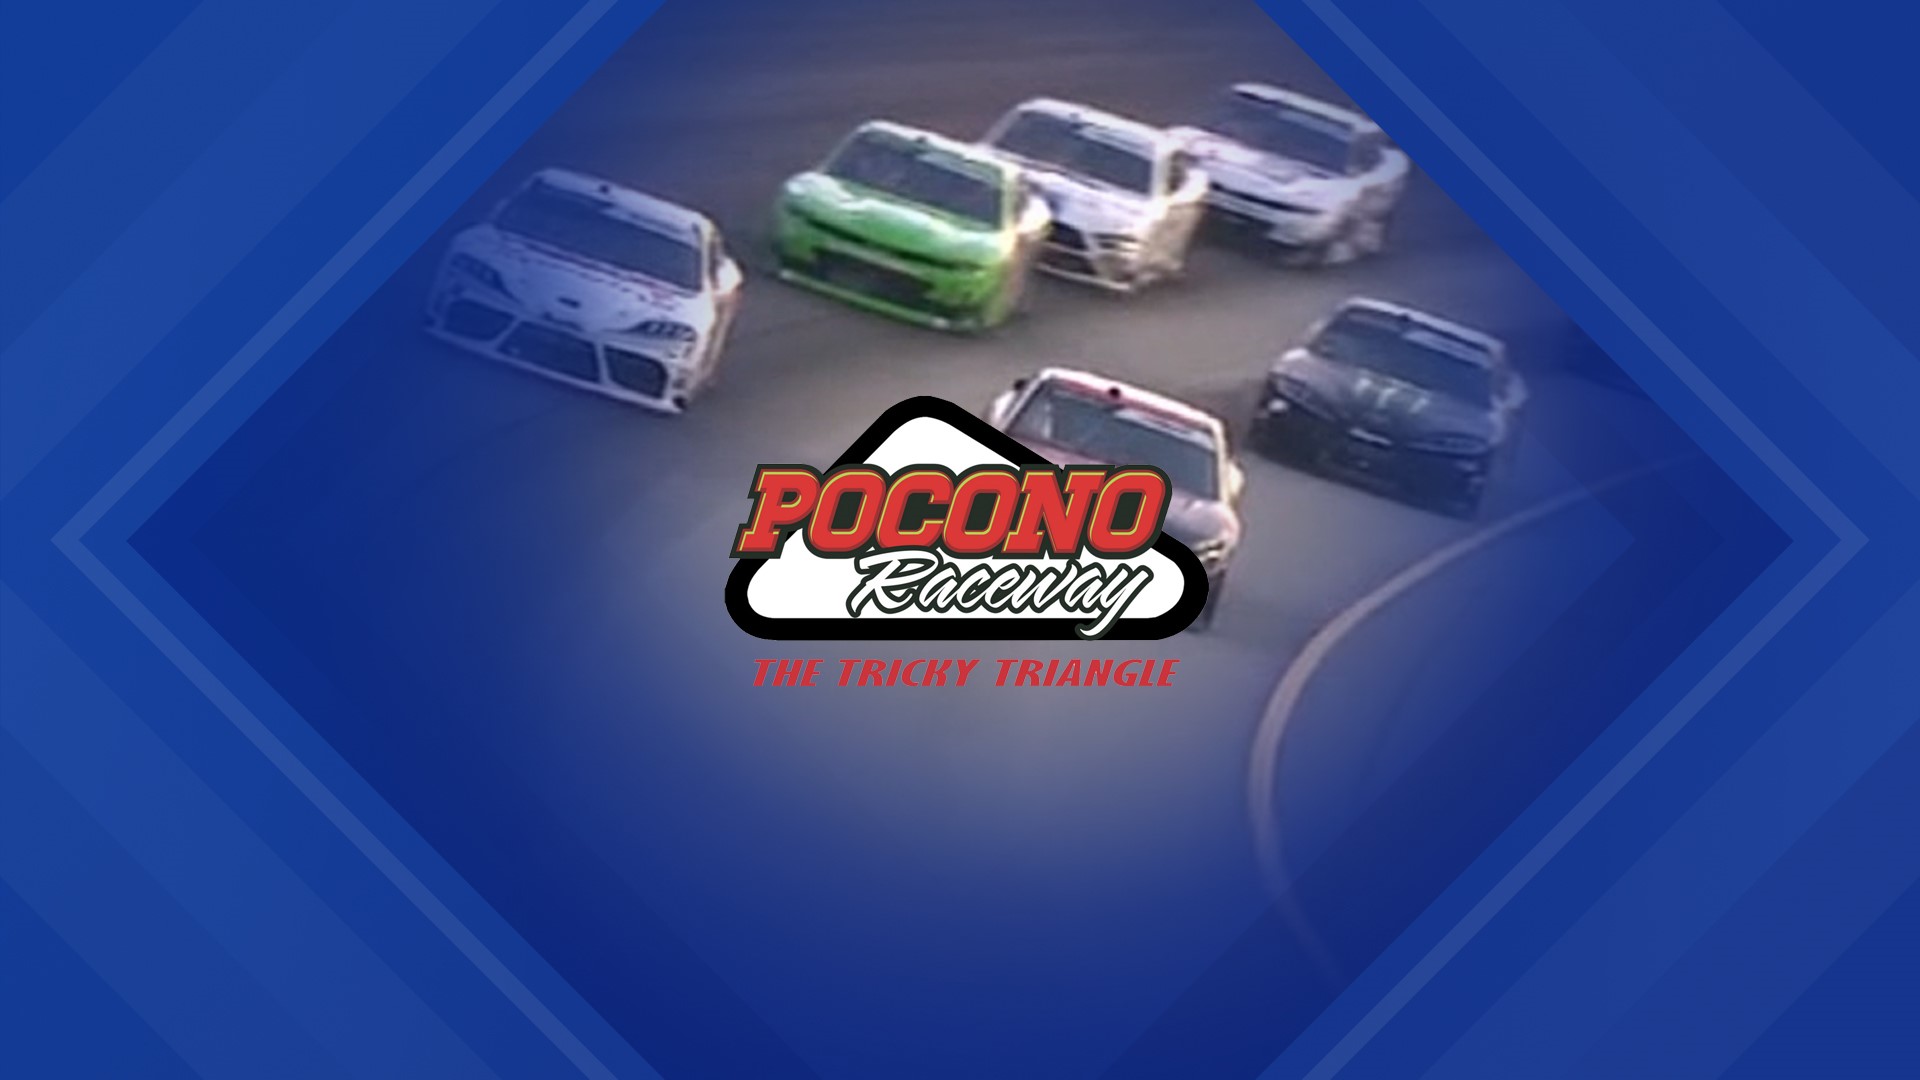 Pocono Raceway, the home of two NASCAR races every year for the last forty years, acknowledged Wednesday it is losing one of those races.